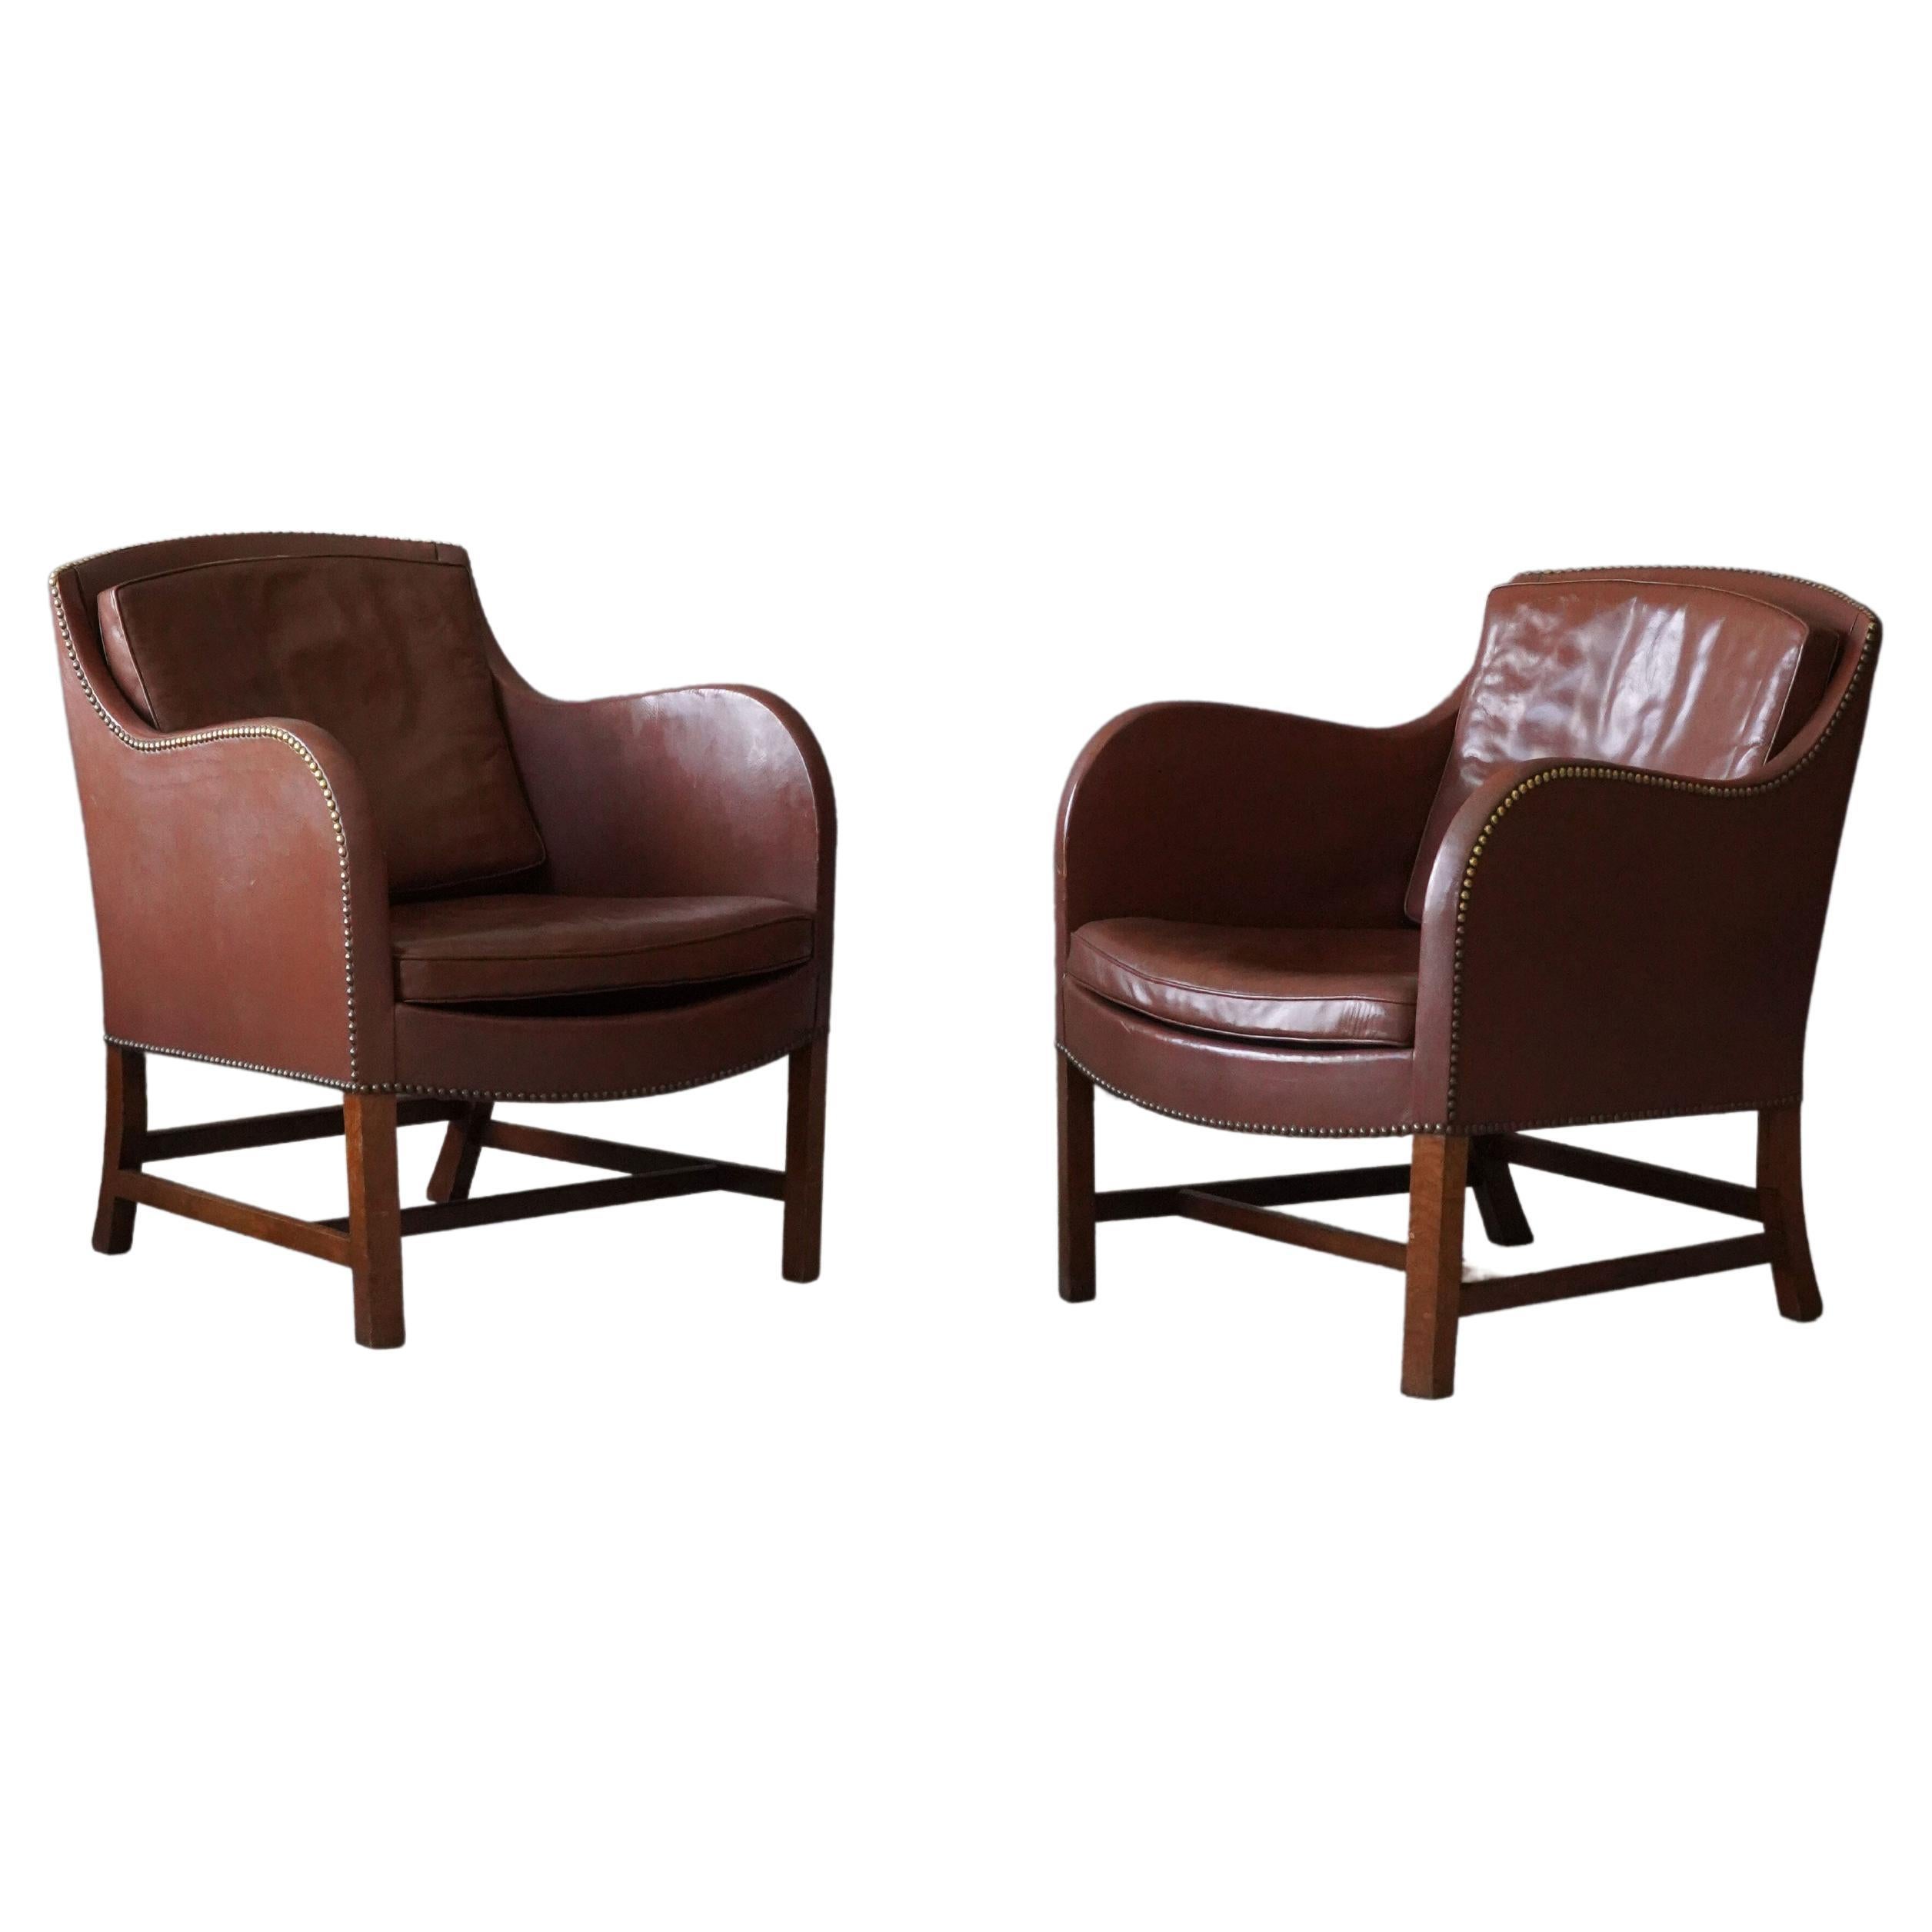 Kaare Klint, Early "Mix" Lounge Chairs, Mahogany, Brass, Leather, Denmark, 1927